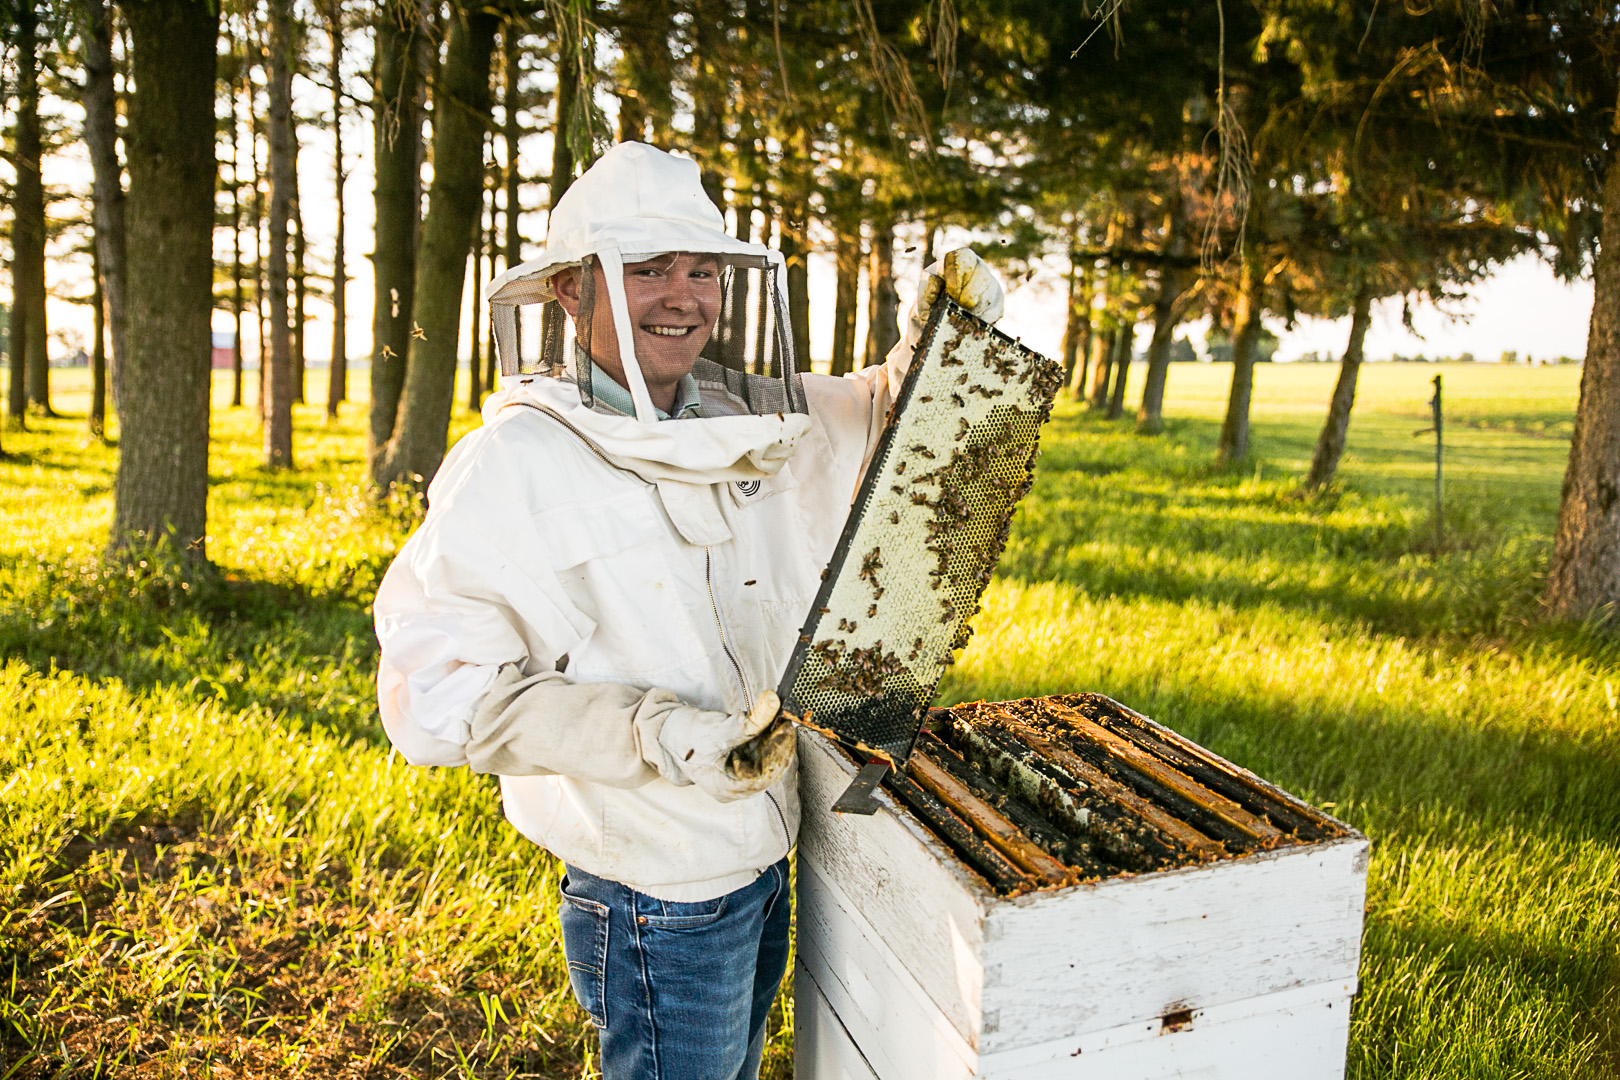 Beekeeper stands next to an active beehive.